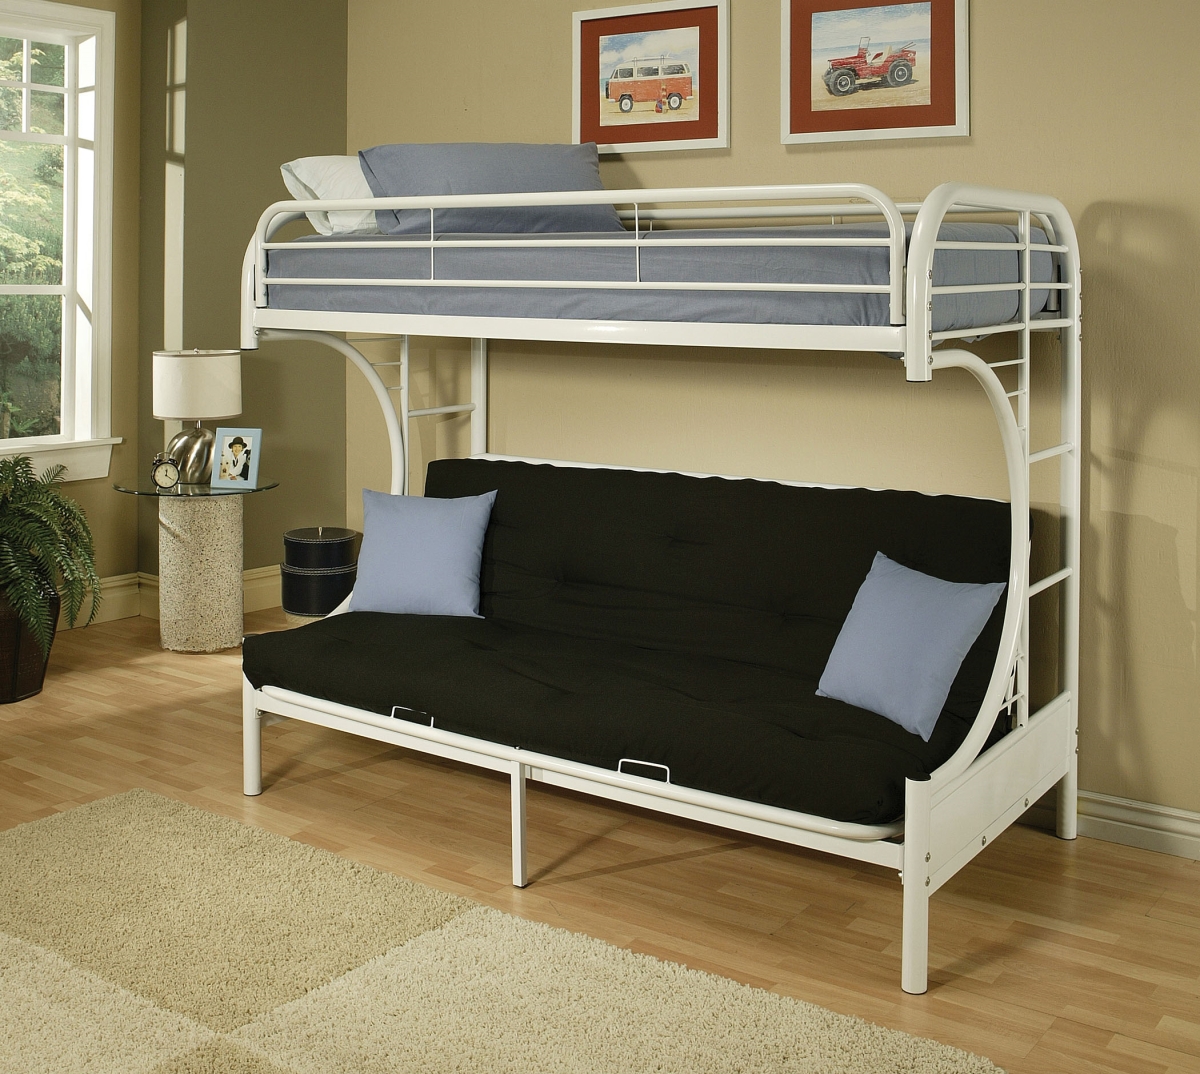 Home Roots Furniture 285192 65 X 78 X 41 In. Metal Tube Twin, Full & Futon Bunk Bed - White